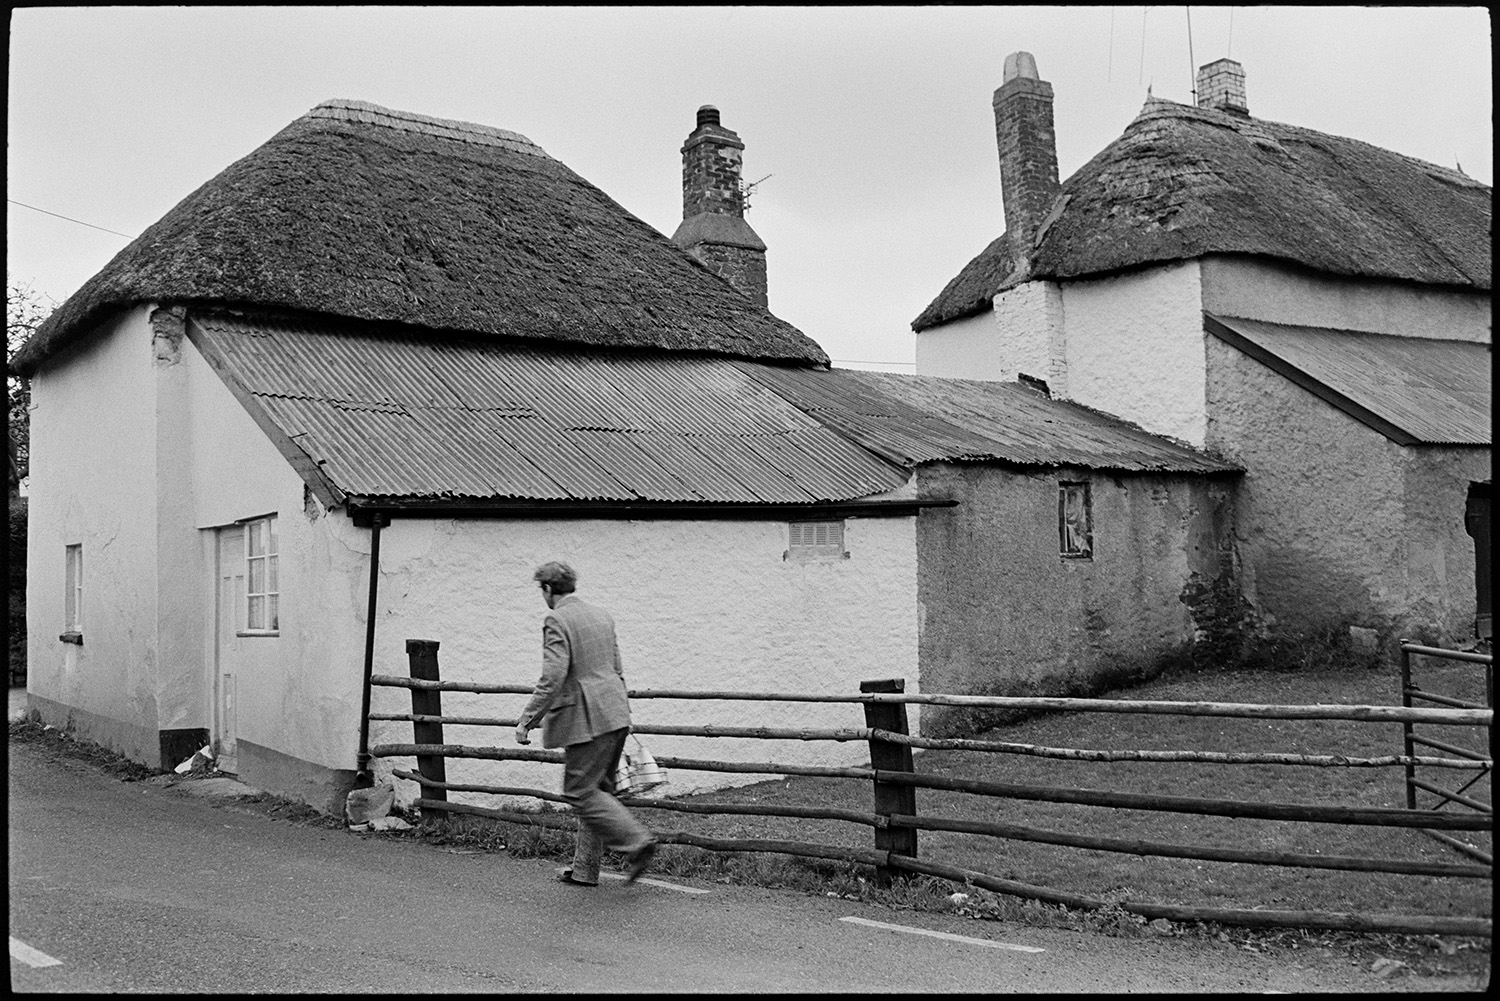 Farmer, milkman doing last milk round, showing new man the ropes, milk bottles.
[Ivor Bourne of Jeffrys farm delivering milk on his last milk round to Chaplands Cottage, Beaford. The cottage has a thatched roof with an extension with a corrugated iron roof.]